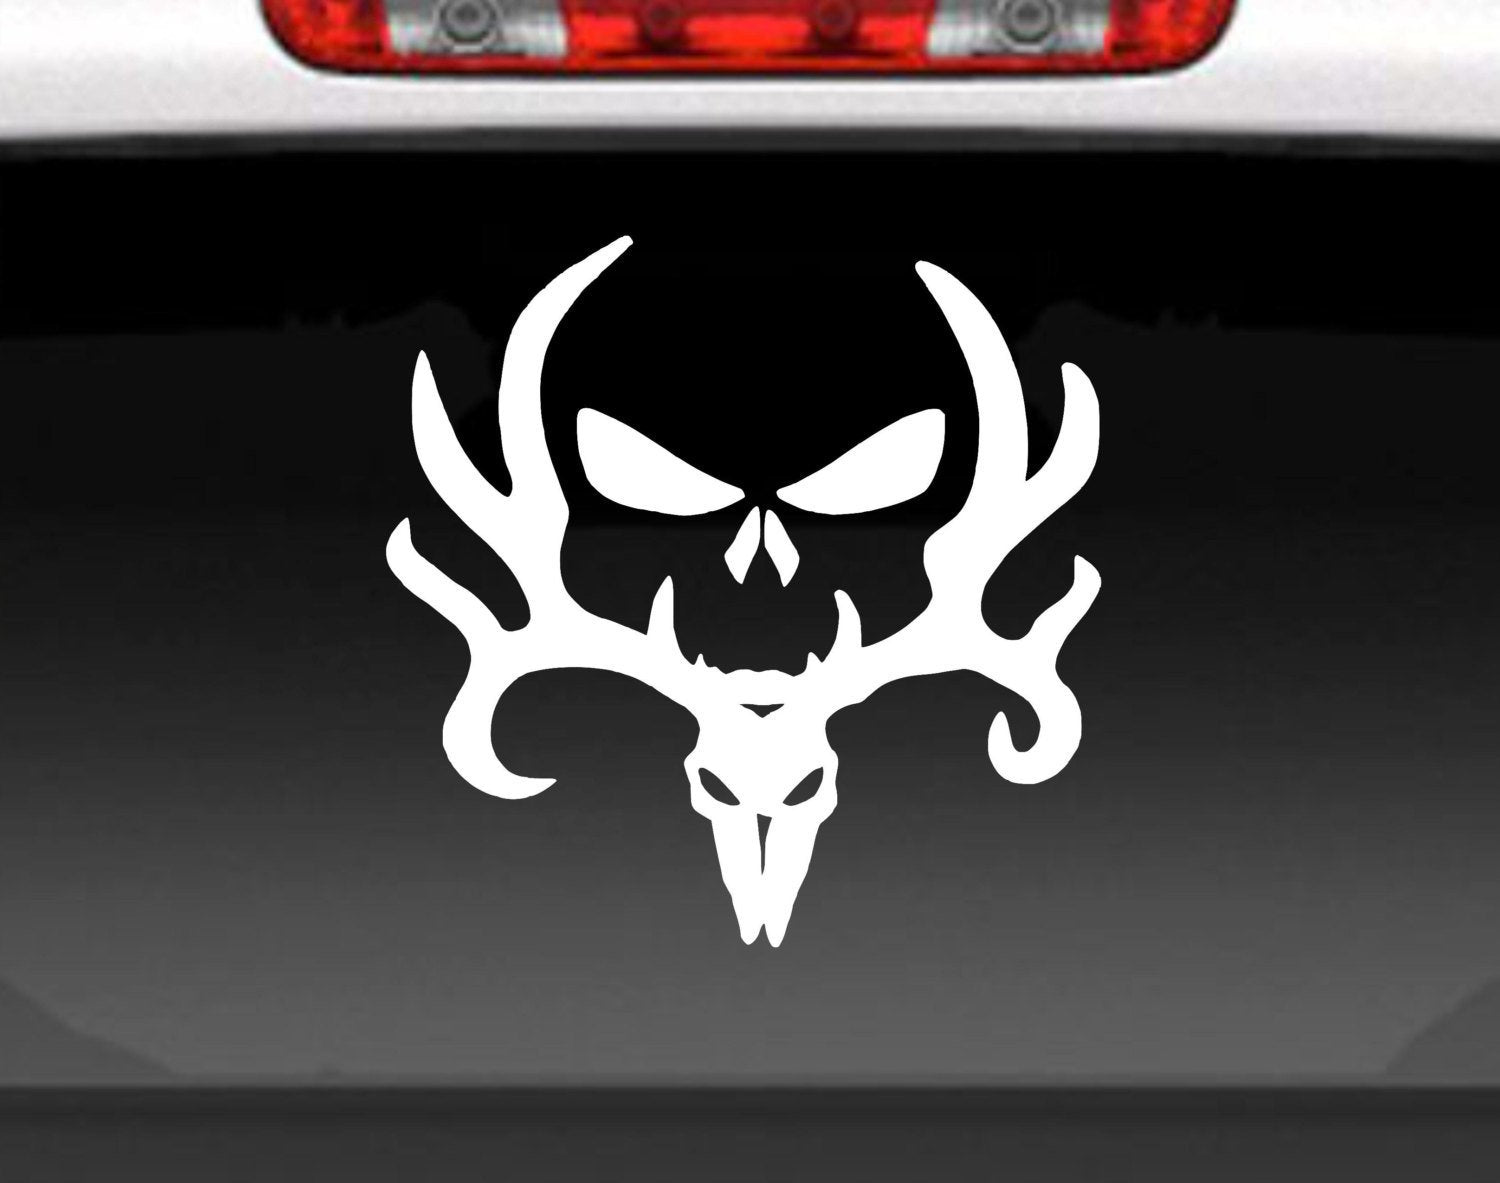 Skull and Bones Car Side Decal Kit! www.DeluxeDecals.net